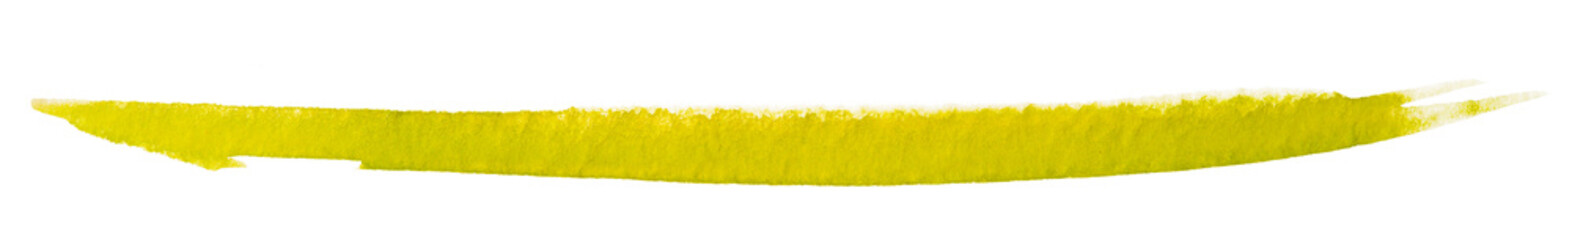 watercolor texture stain yellow thin long strip painted by brush. abstract isolated on white background.